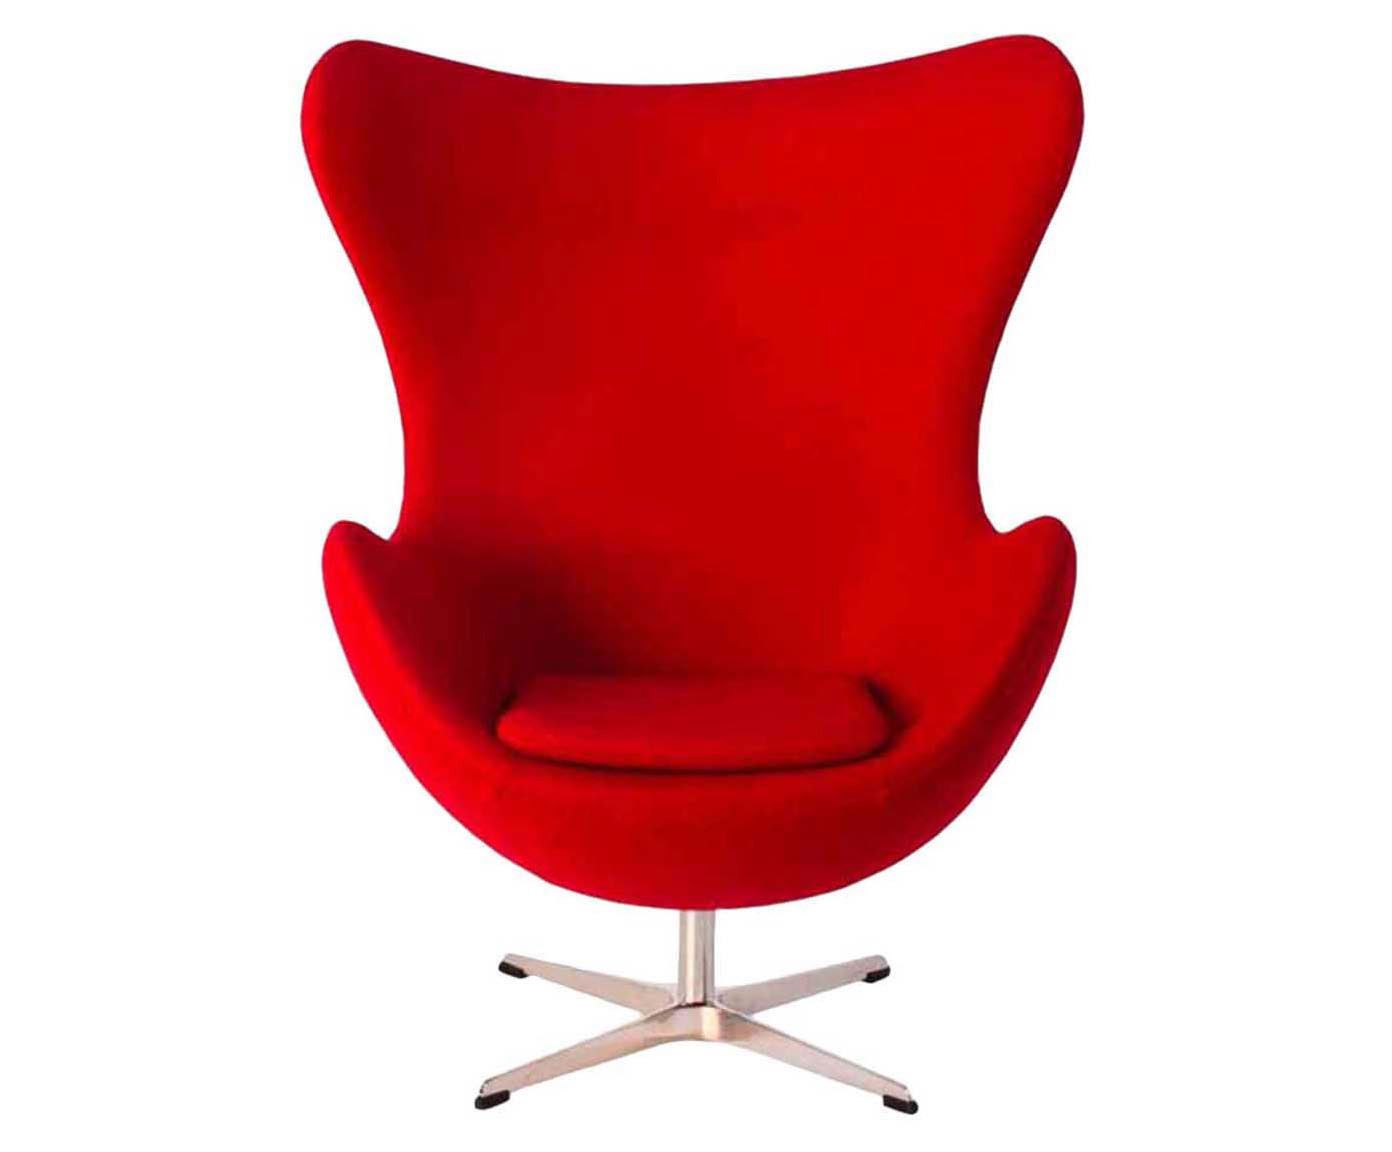 Poltrona round - rouge | Westwing.com.br